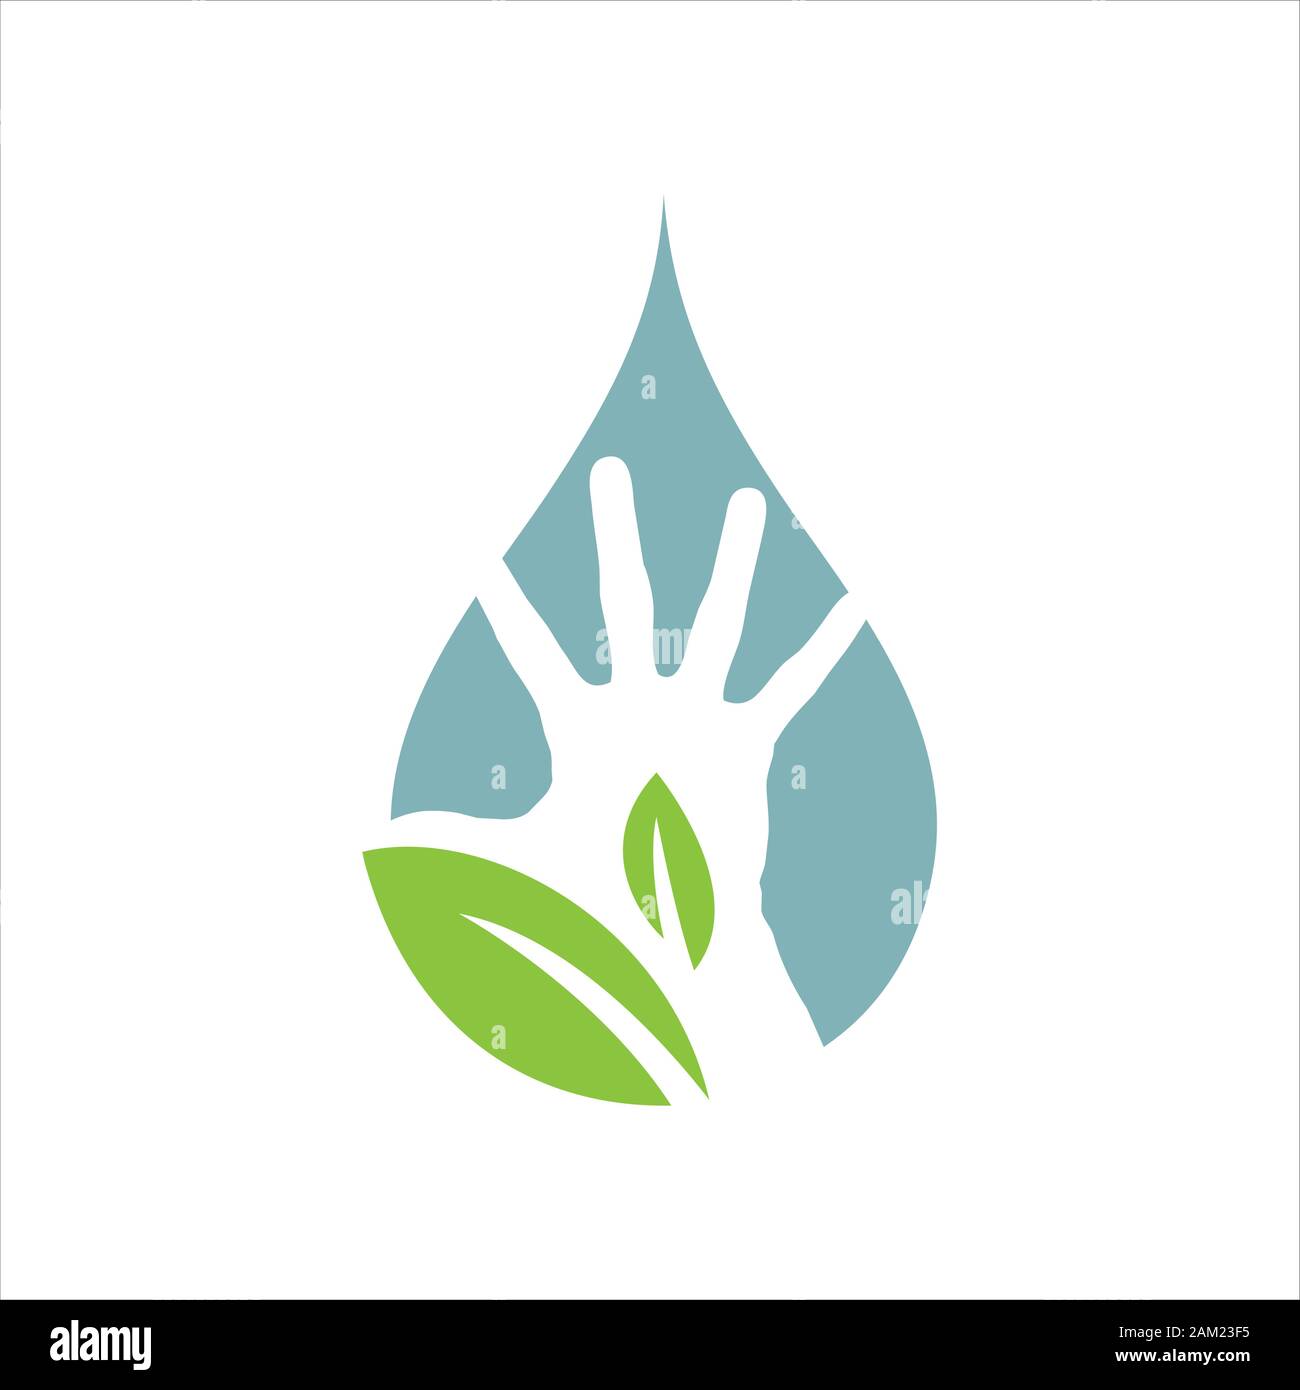 eco green hand logo vector design people who protect nature concept inspiration Stock Vector